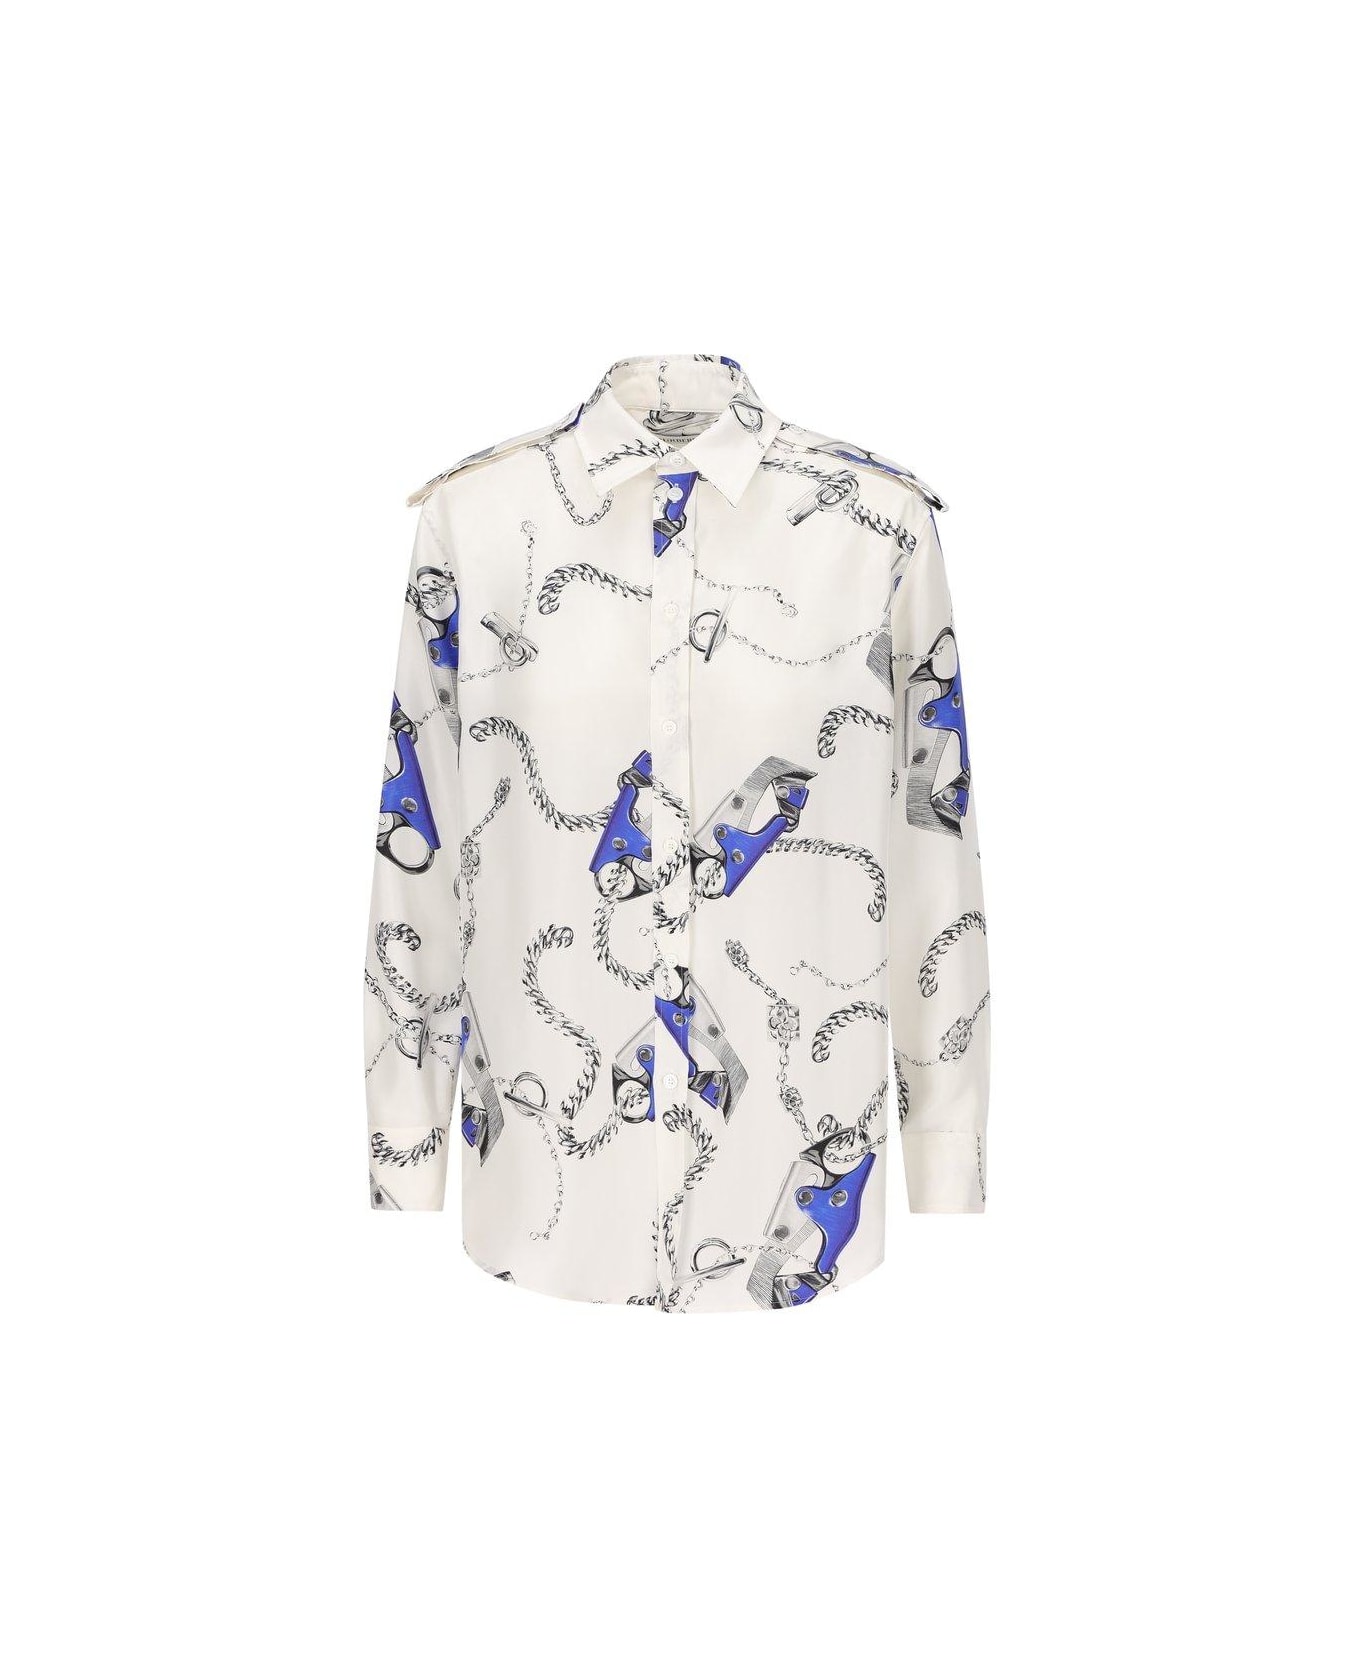 Burberry Graphic Printed Buttoned Shirt - WHITE/BLUE シャツ